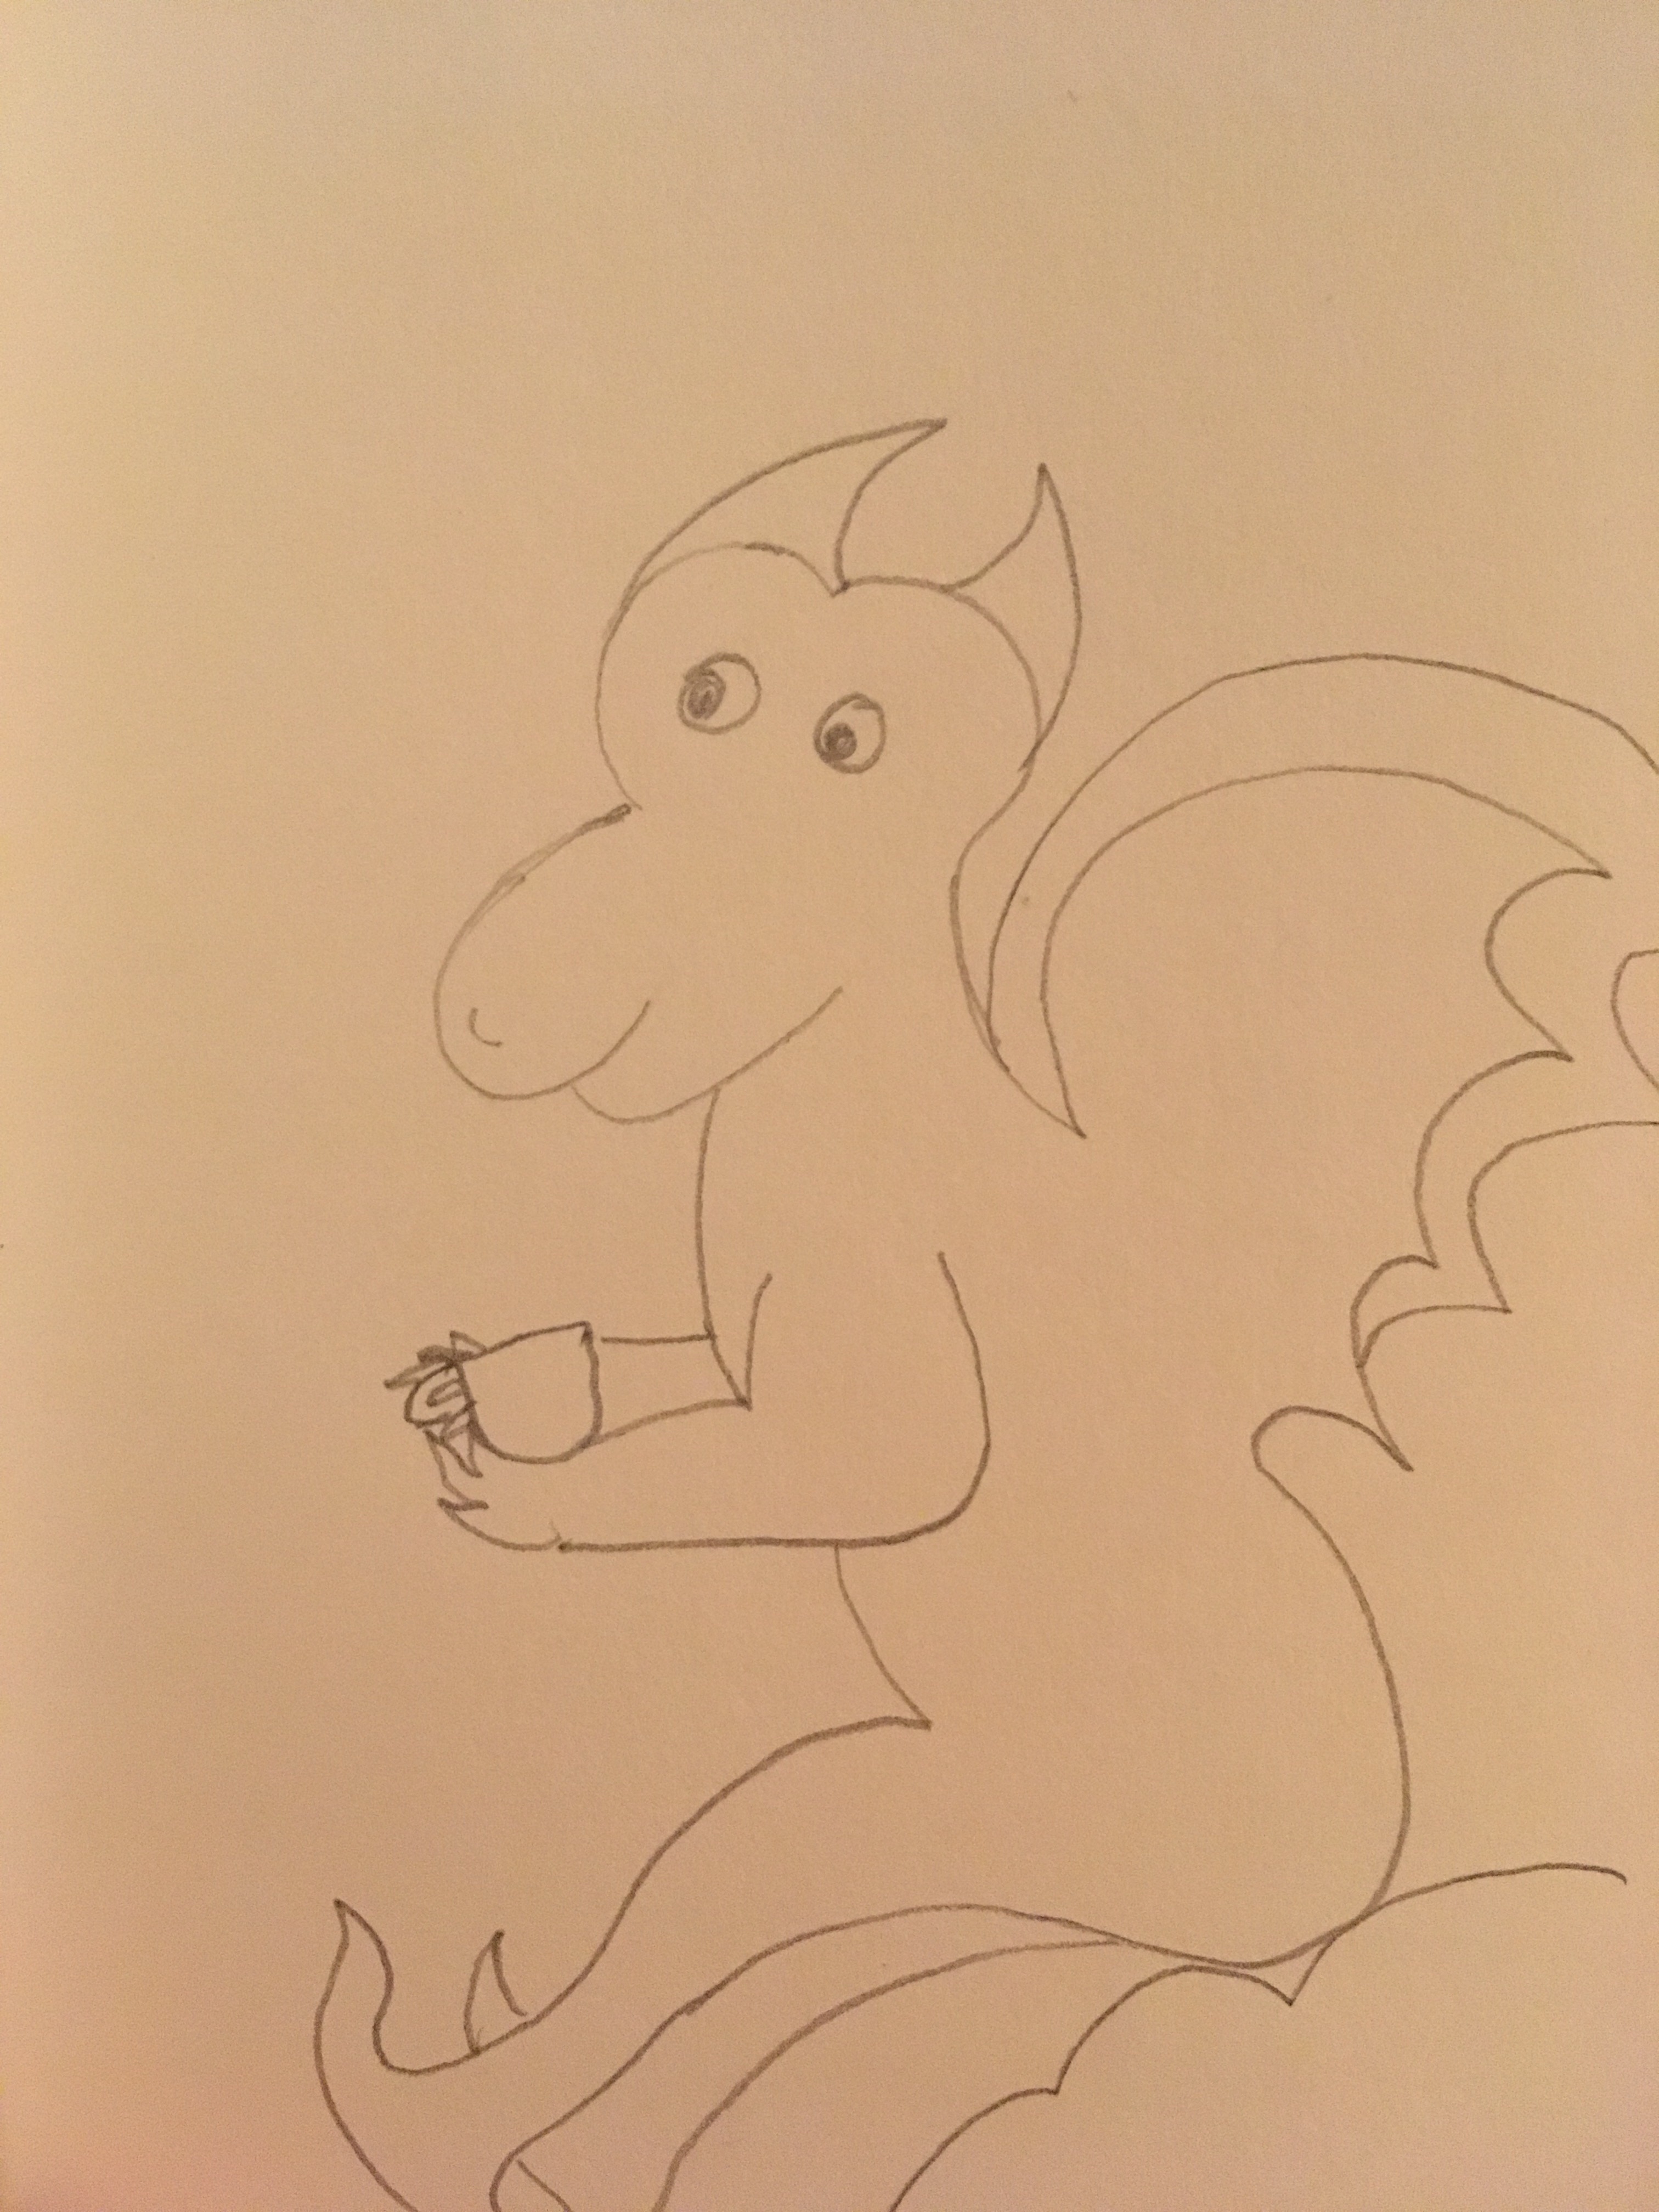 Where dragon sitting on my thing holding a cup